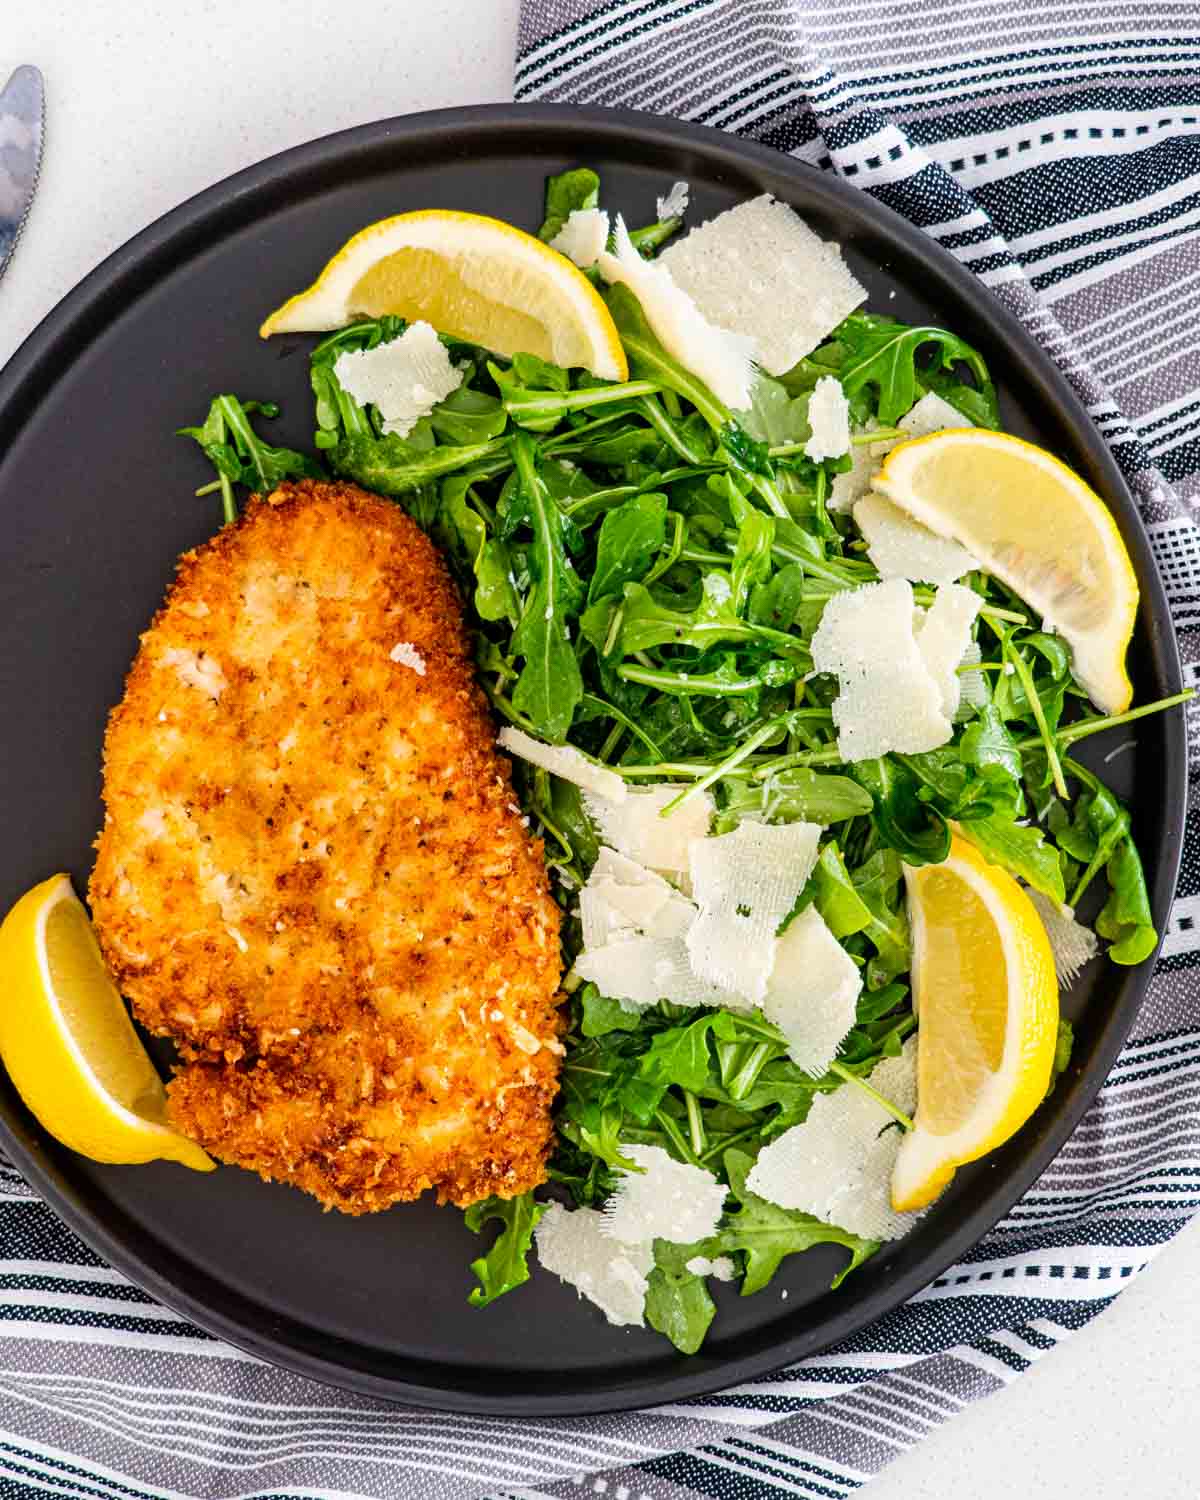 chicken milanese next to arugula salad garnished with shaved parmesan and lemon wedges.